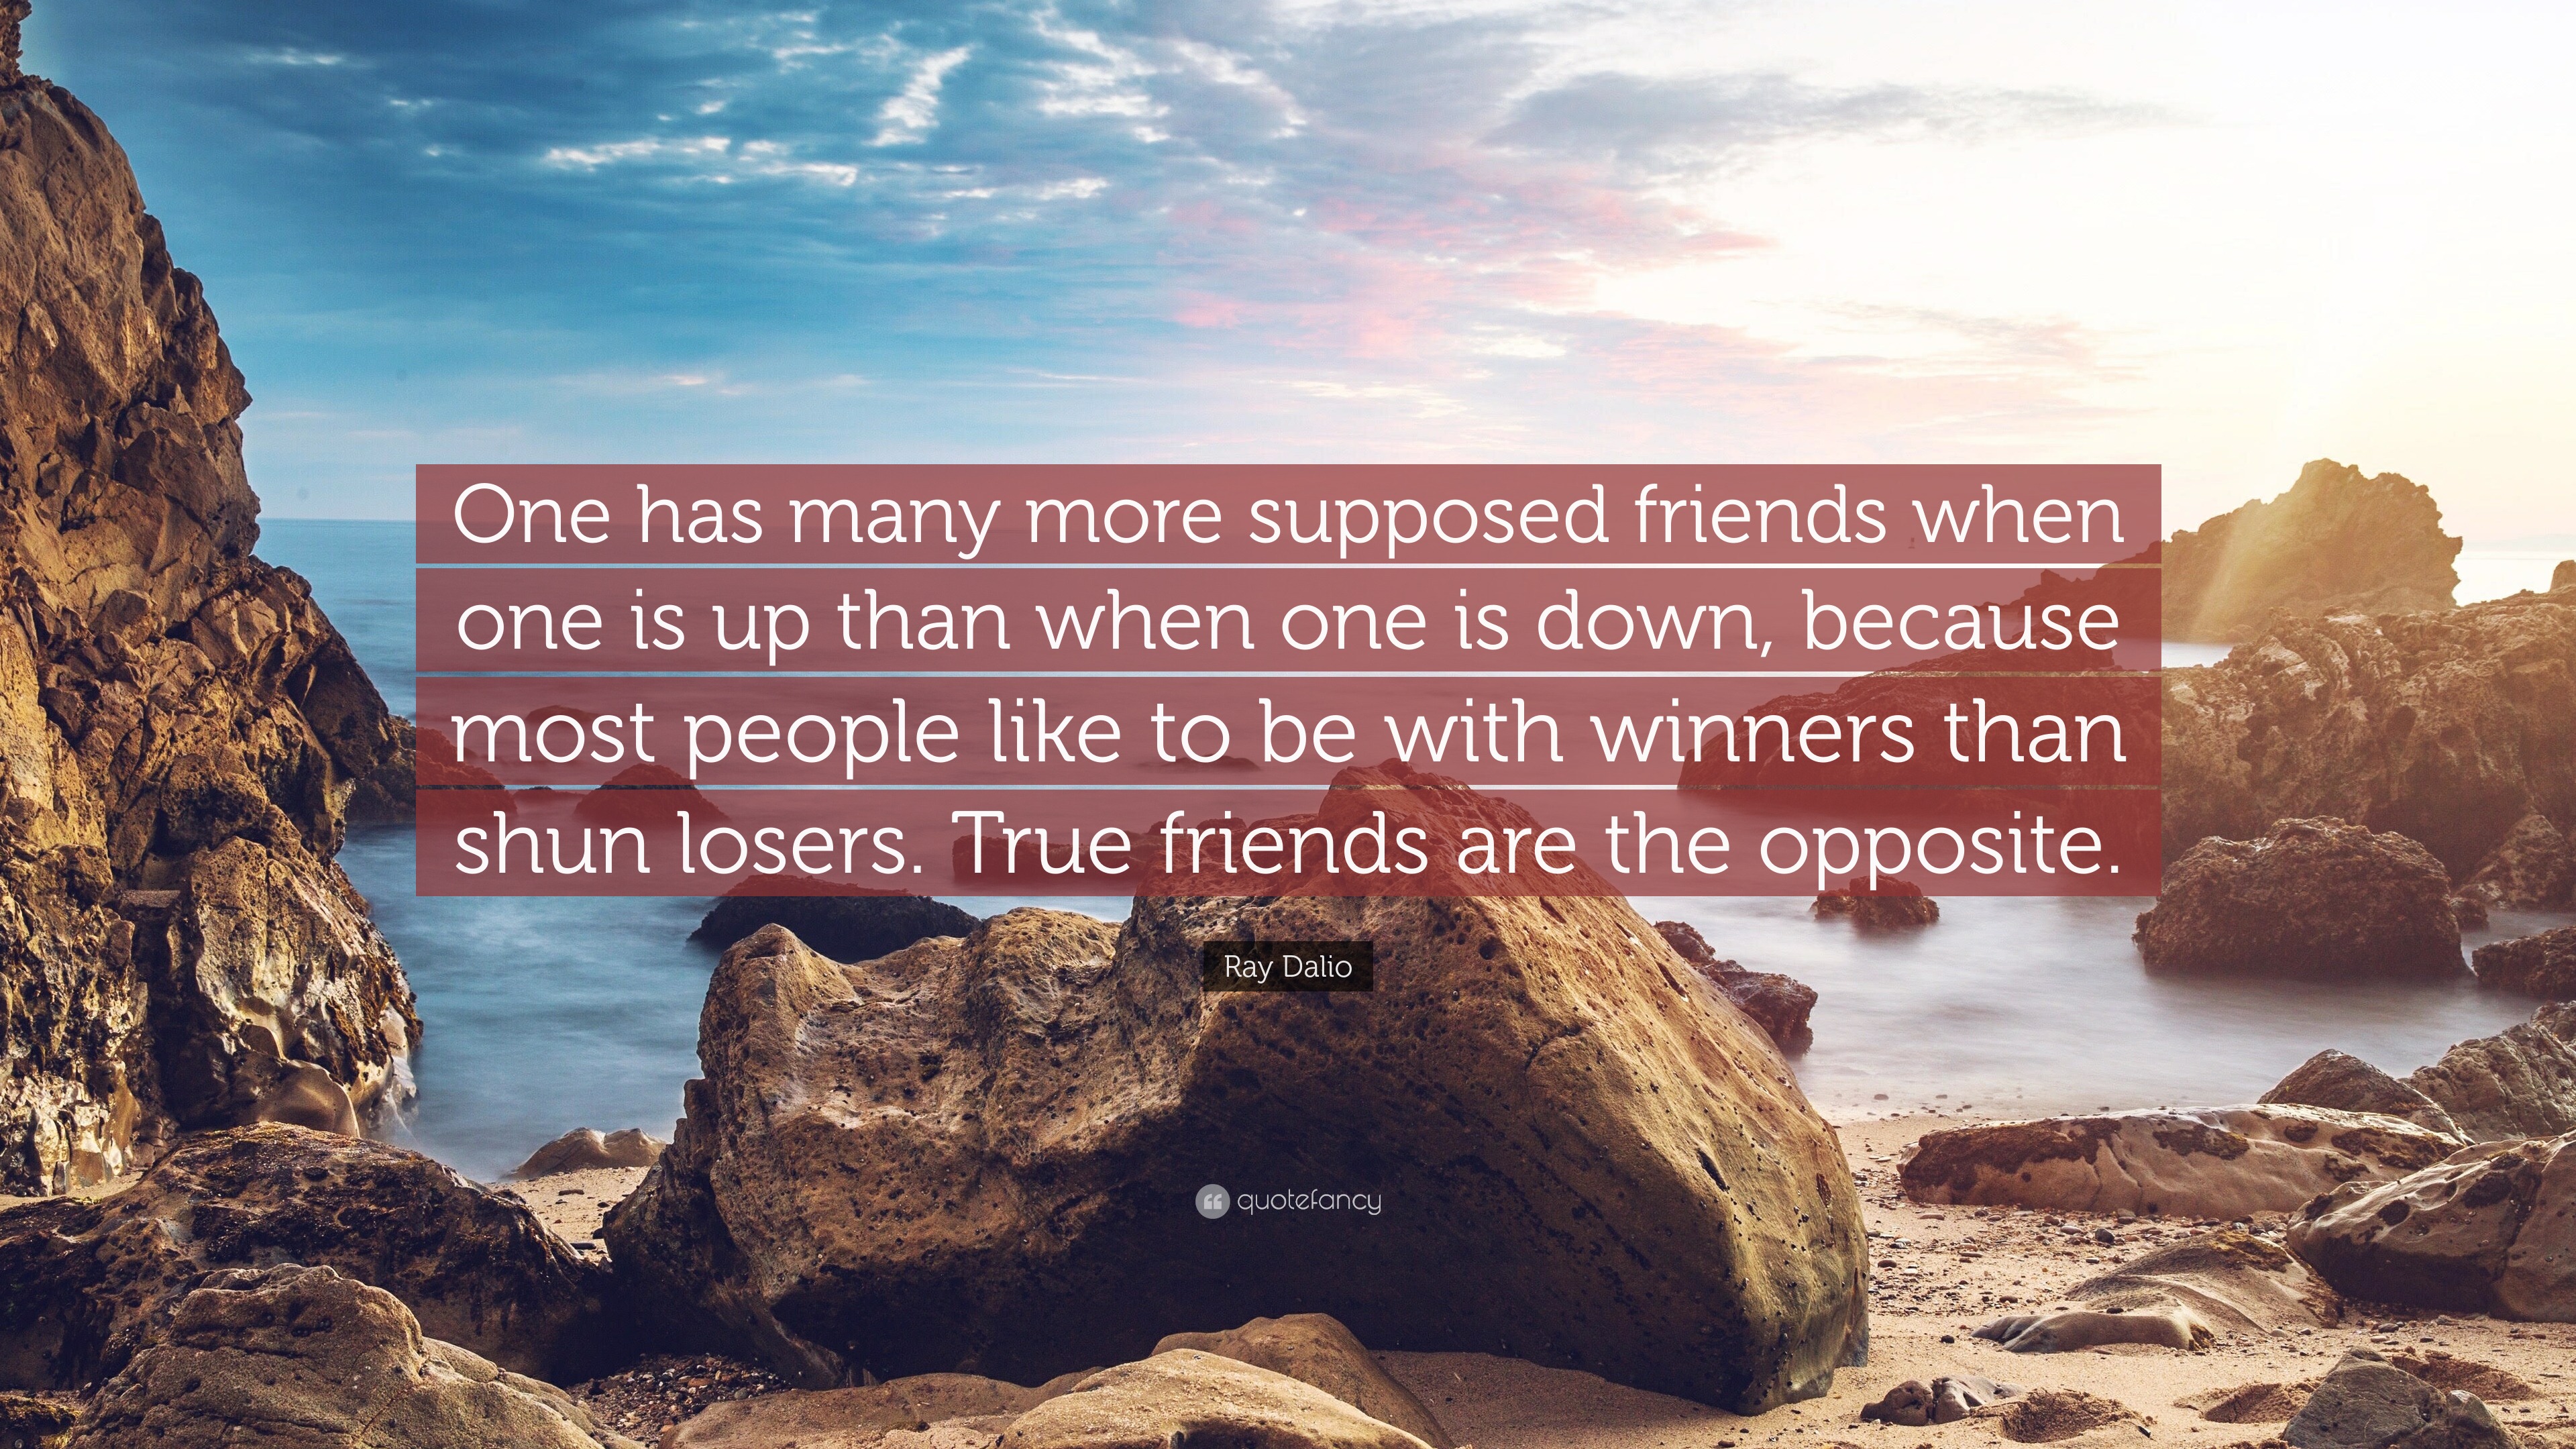 Ray Dalio Quote: “One has many more supposed friends when one is up ...